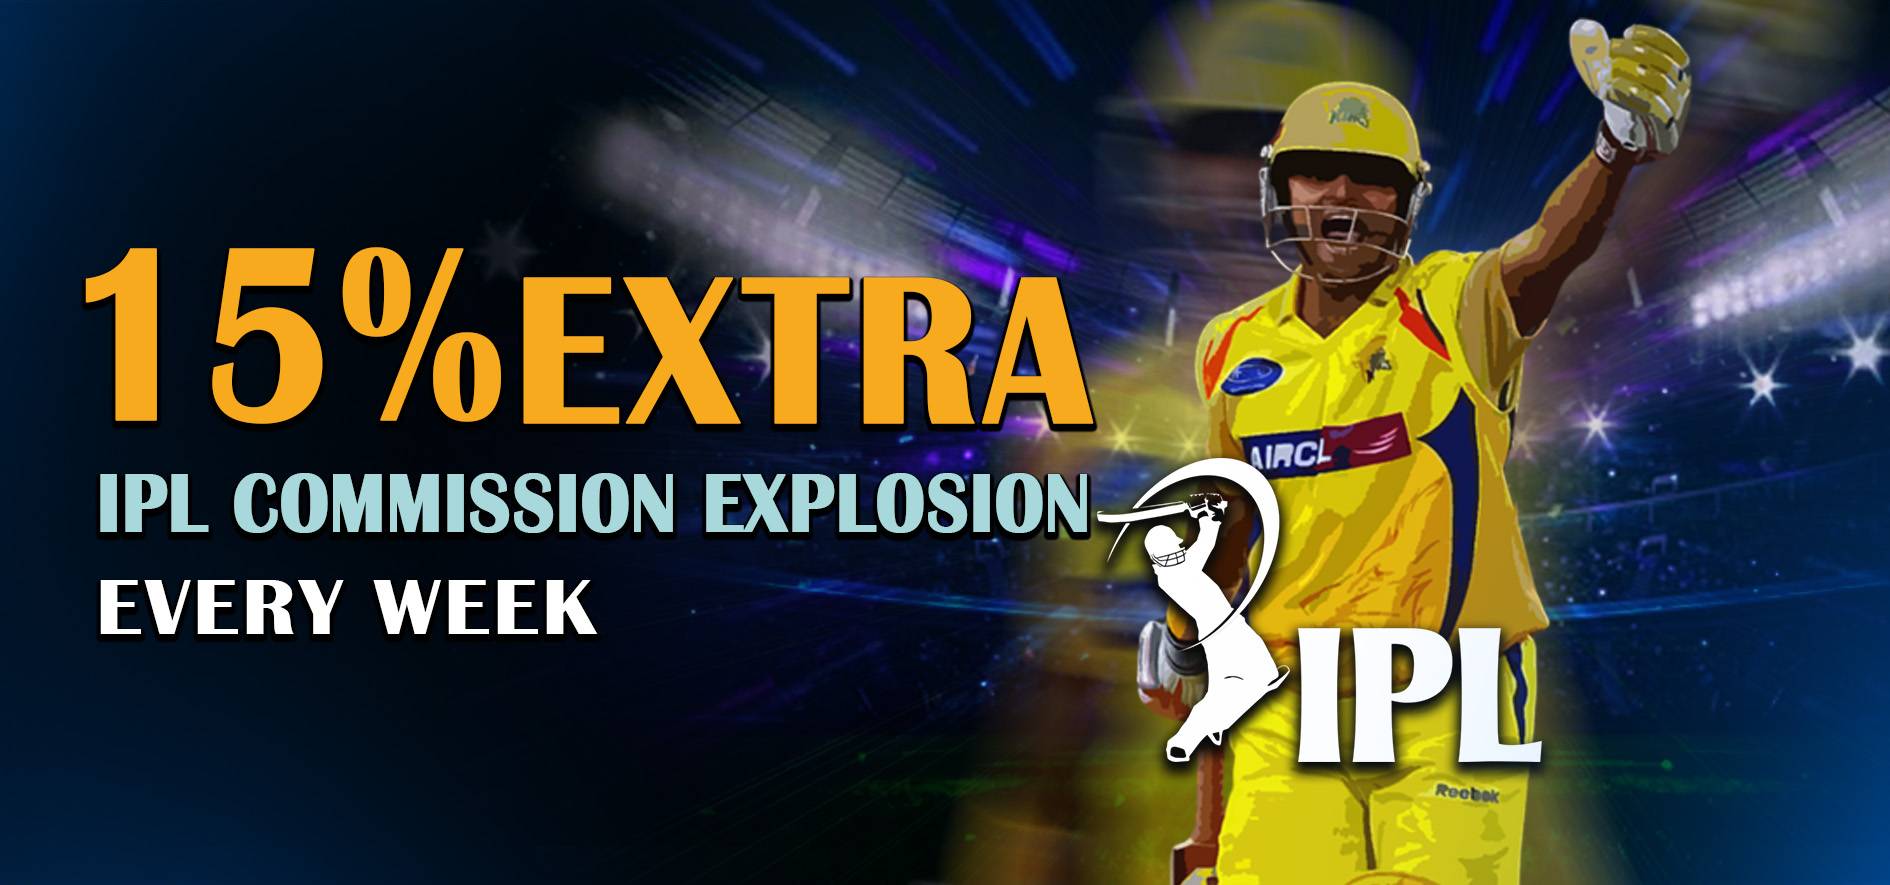 WEB VIEW IPL COMMISSION EXPLOSION 15� EXTRA